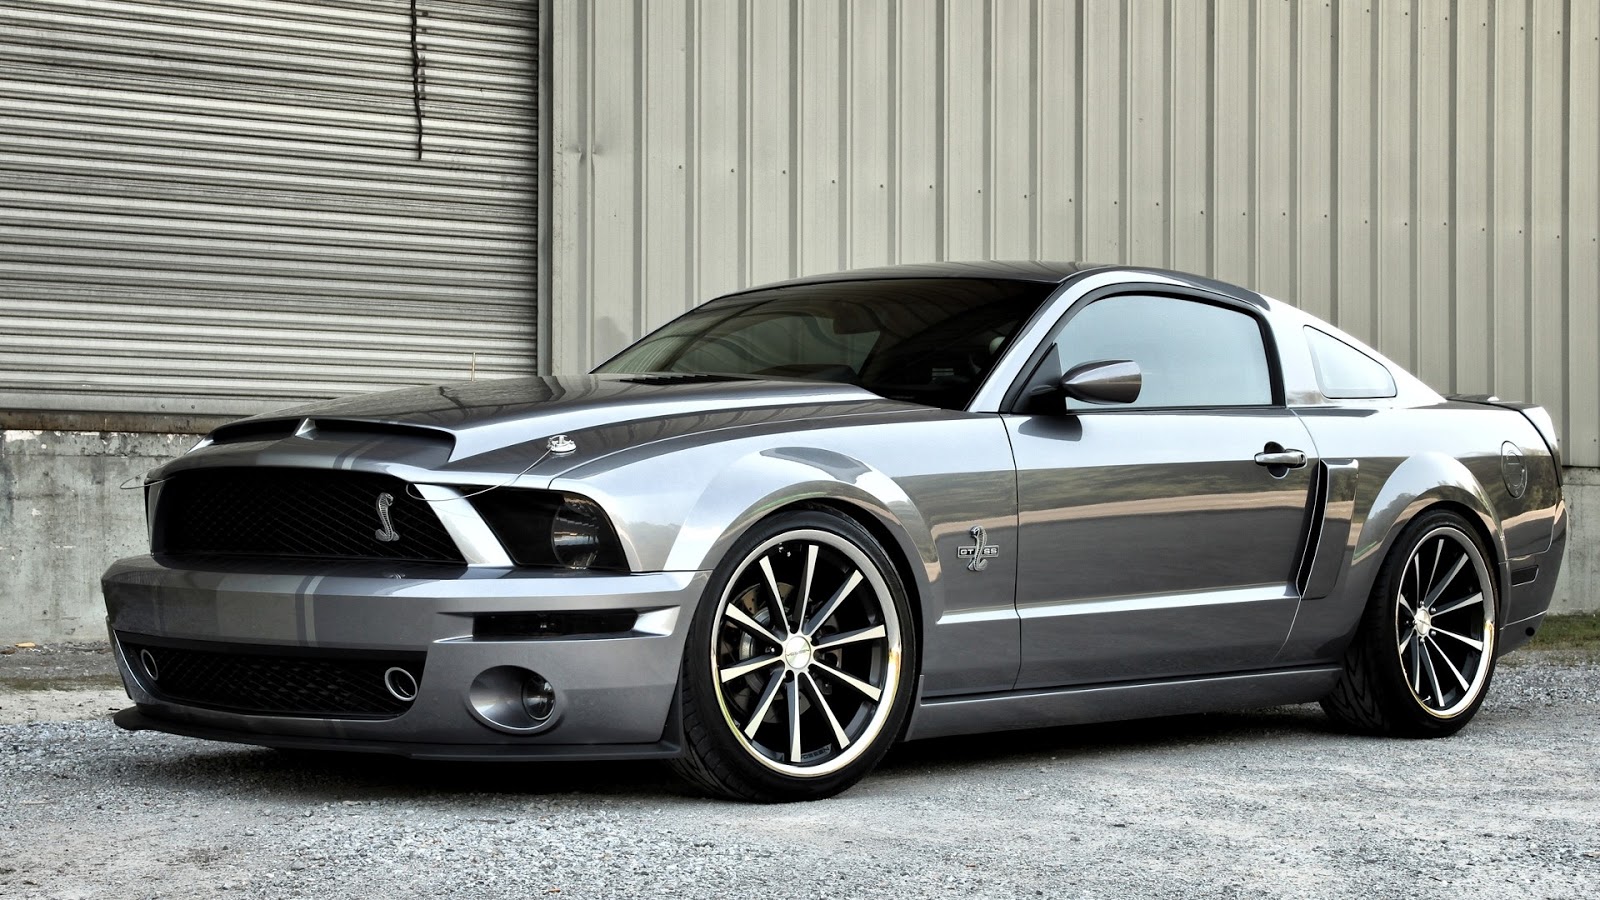 ford car wallpaper,land vehicle,vehicle,car,motor vehicle,shelby mustang